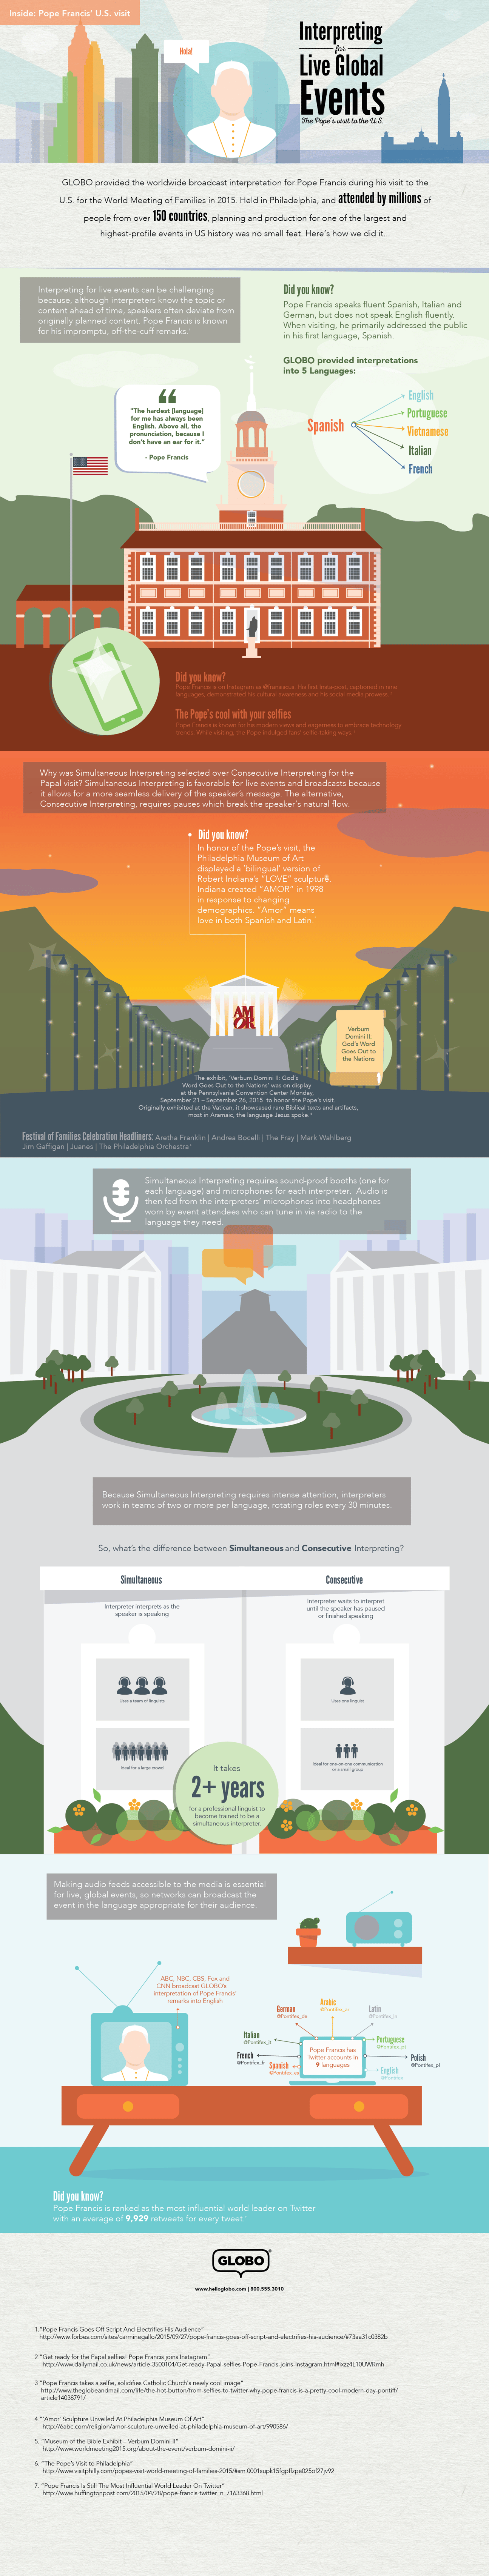 papal_infographic